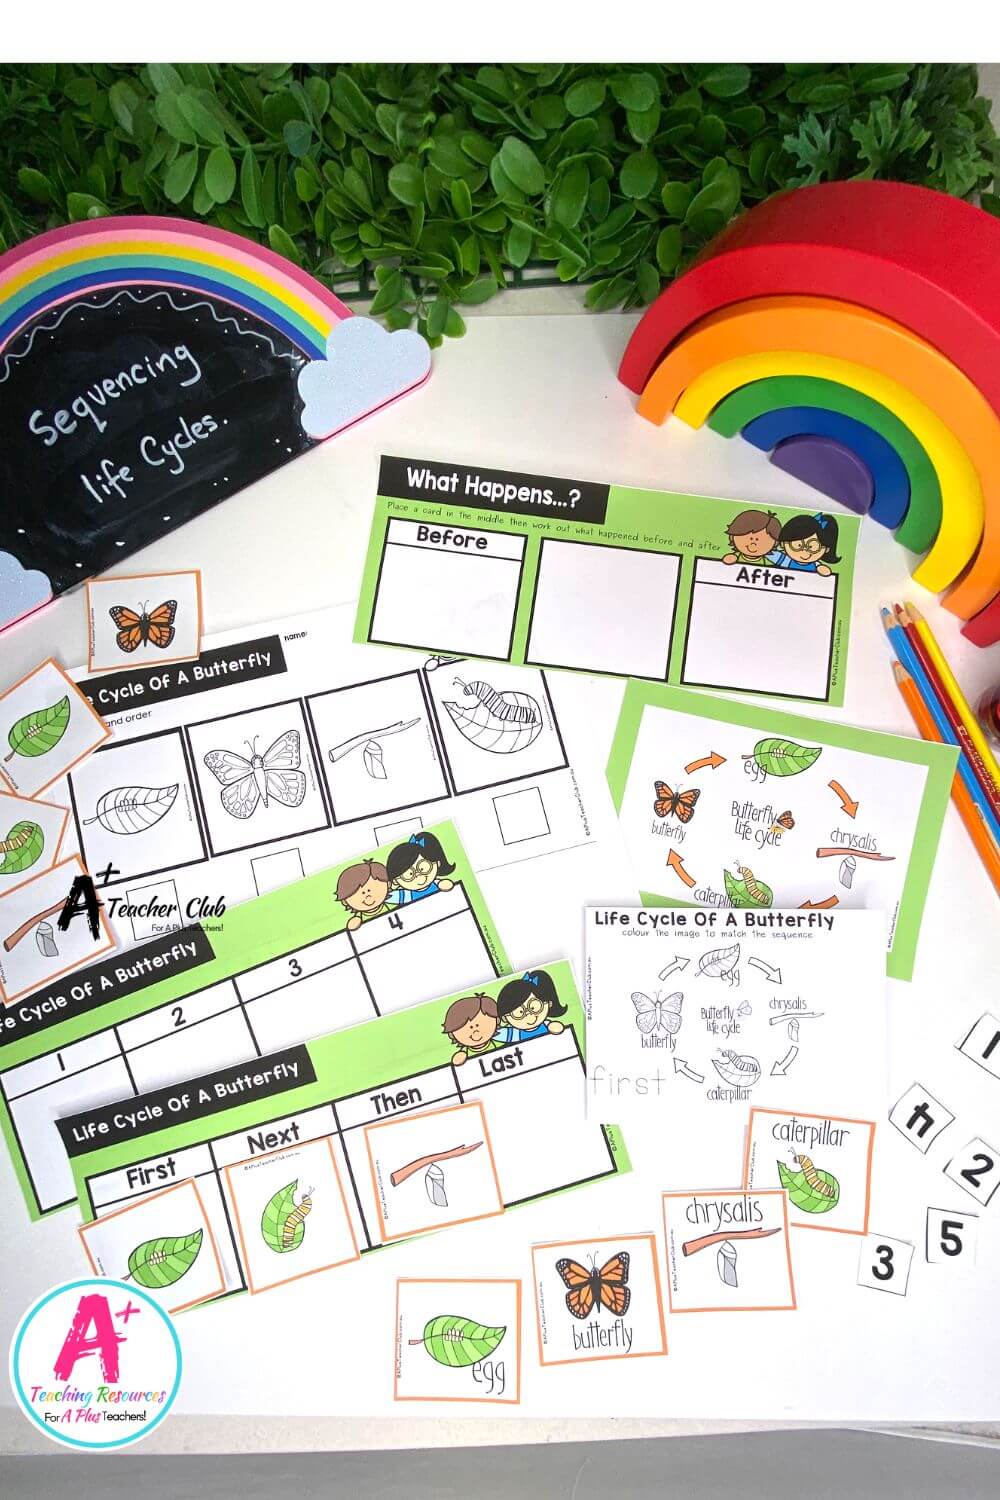 Life Cycle Sequencing 4 Steps - Butterfly Activities Pack